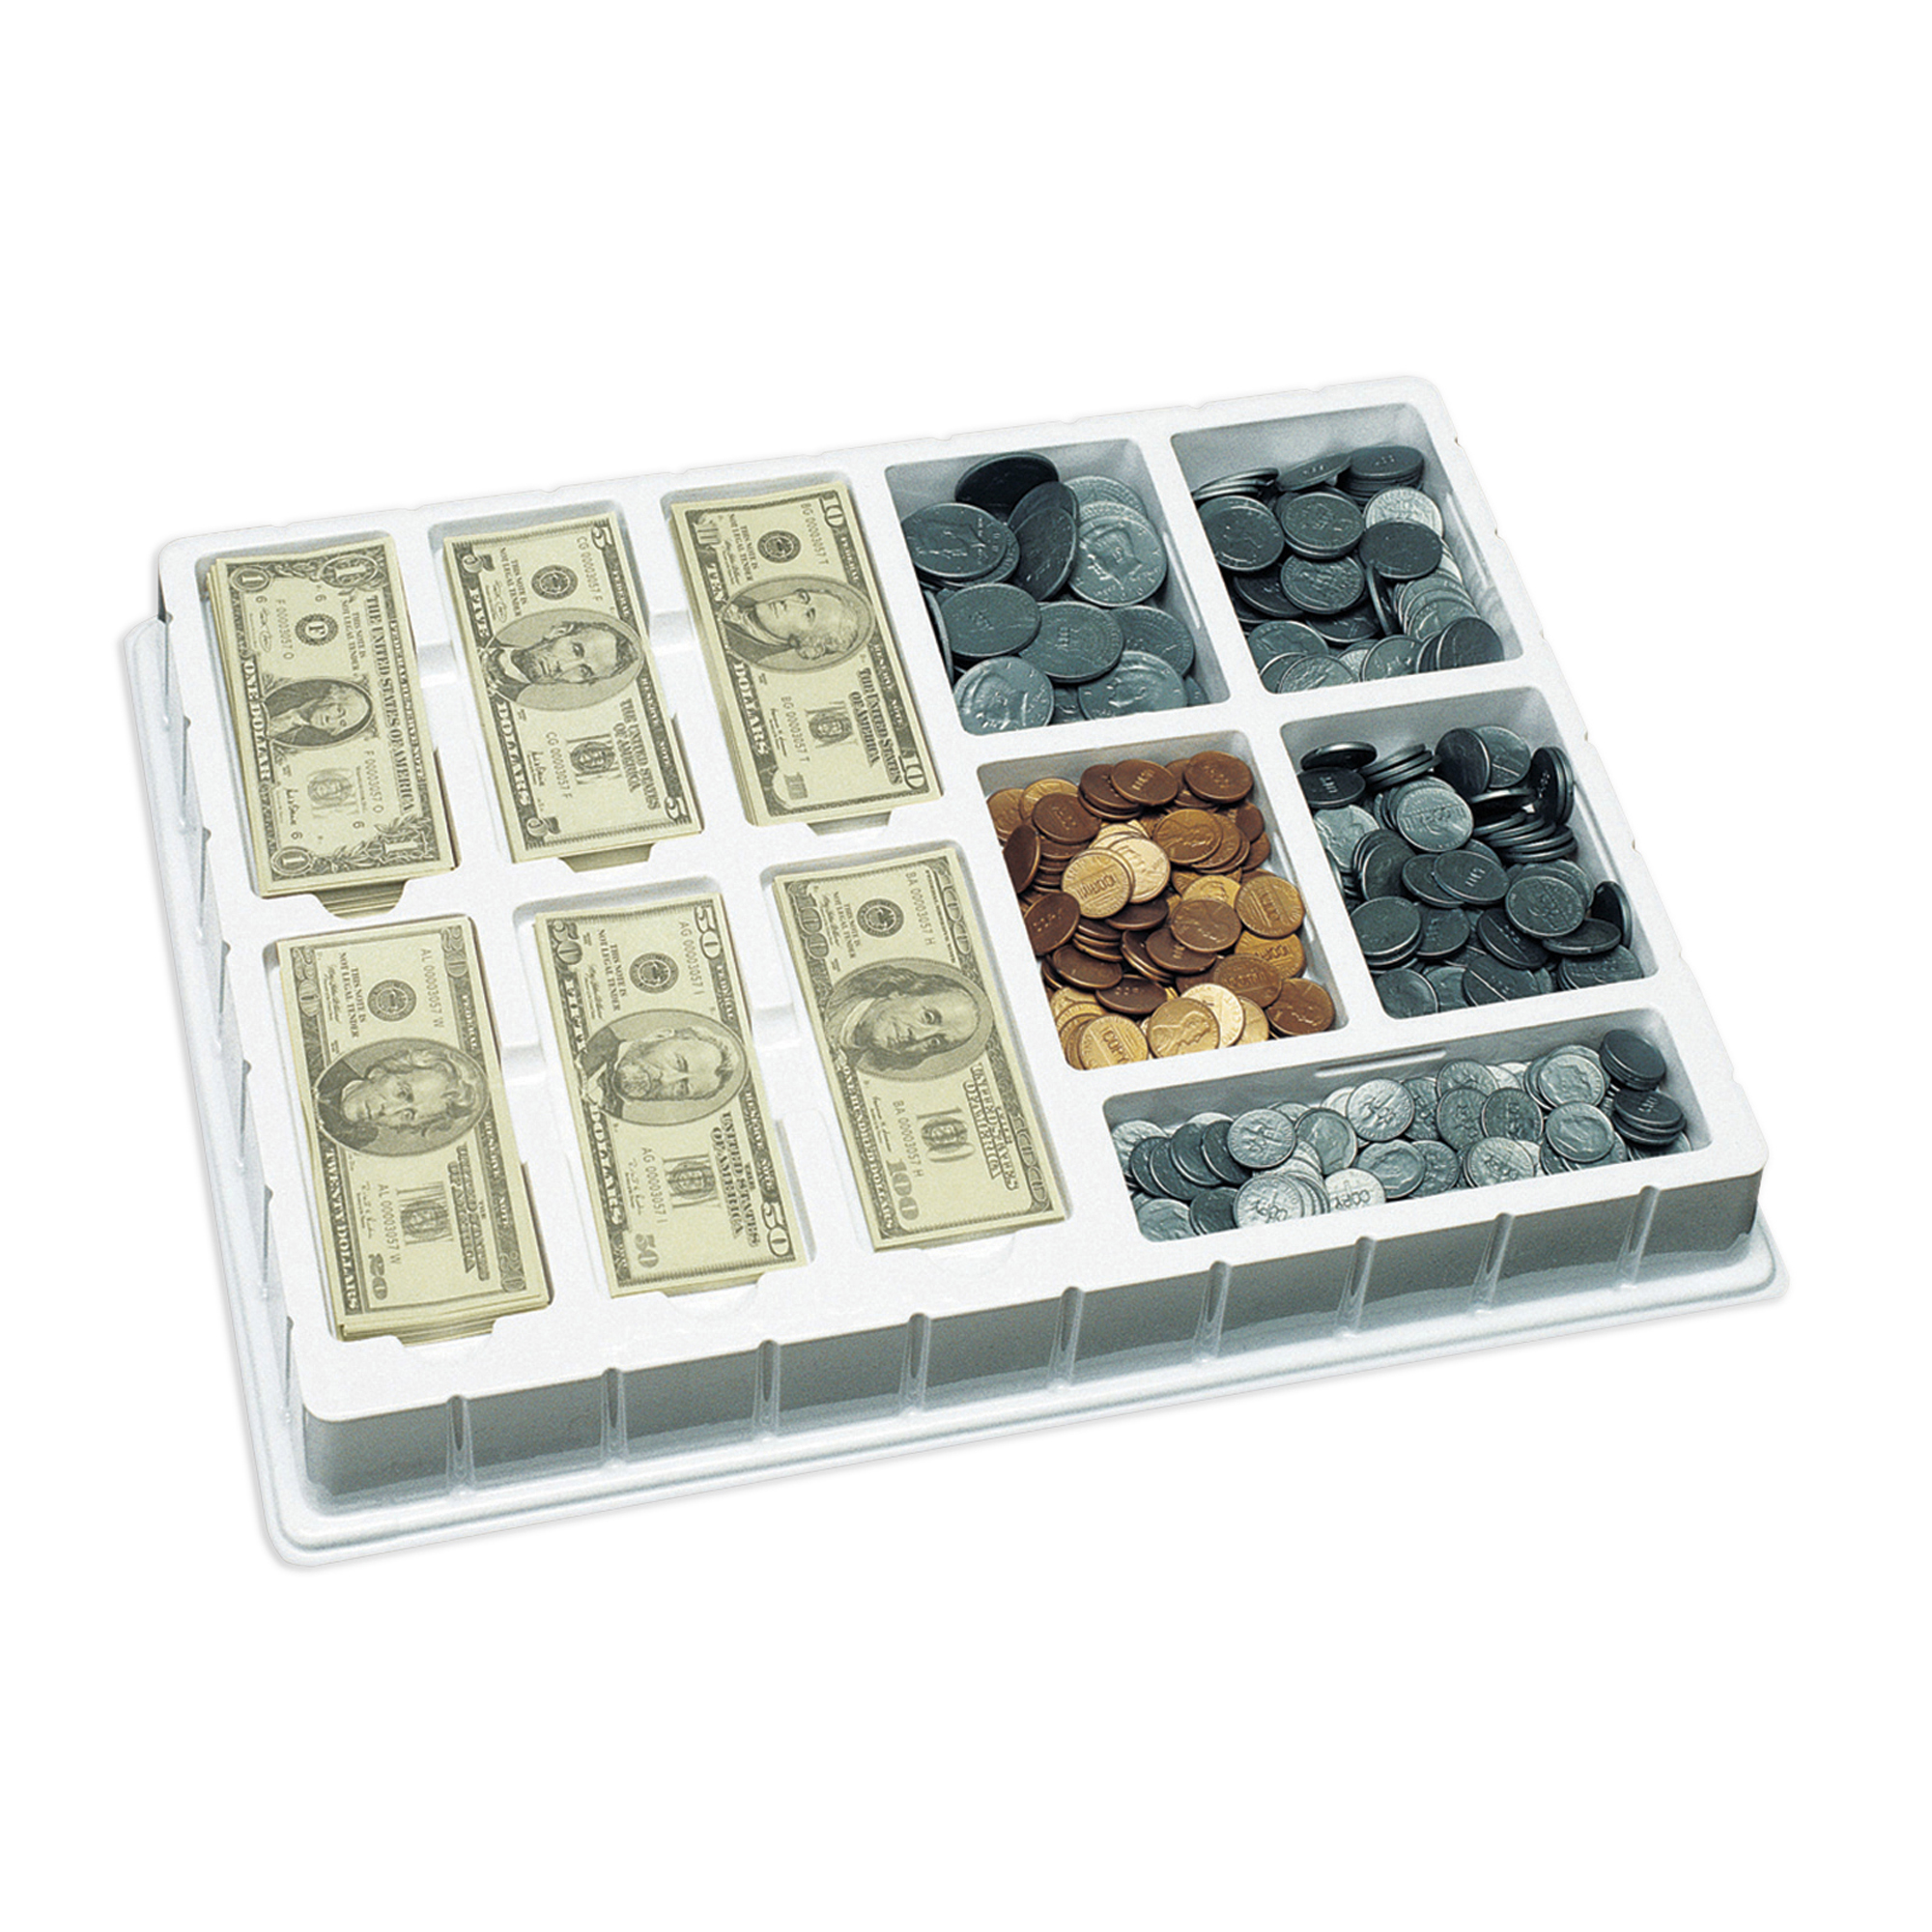 Educational Insights® Play Money, Coins & Bills Deluxe Set, 750 Pieces - image 1 of 2